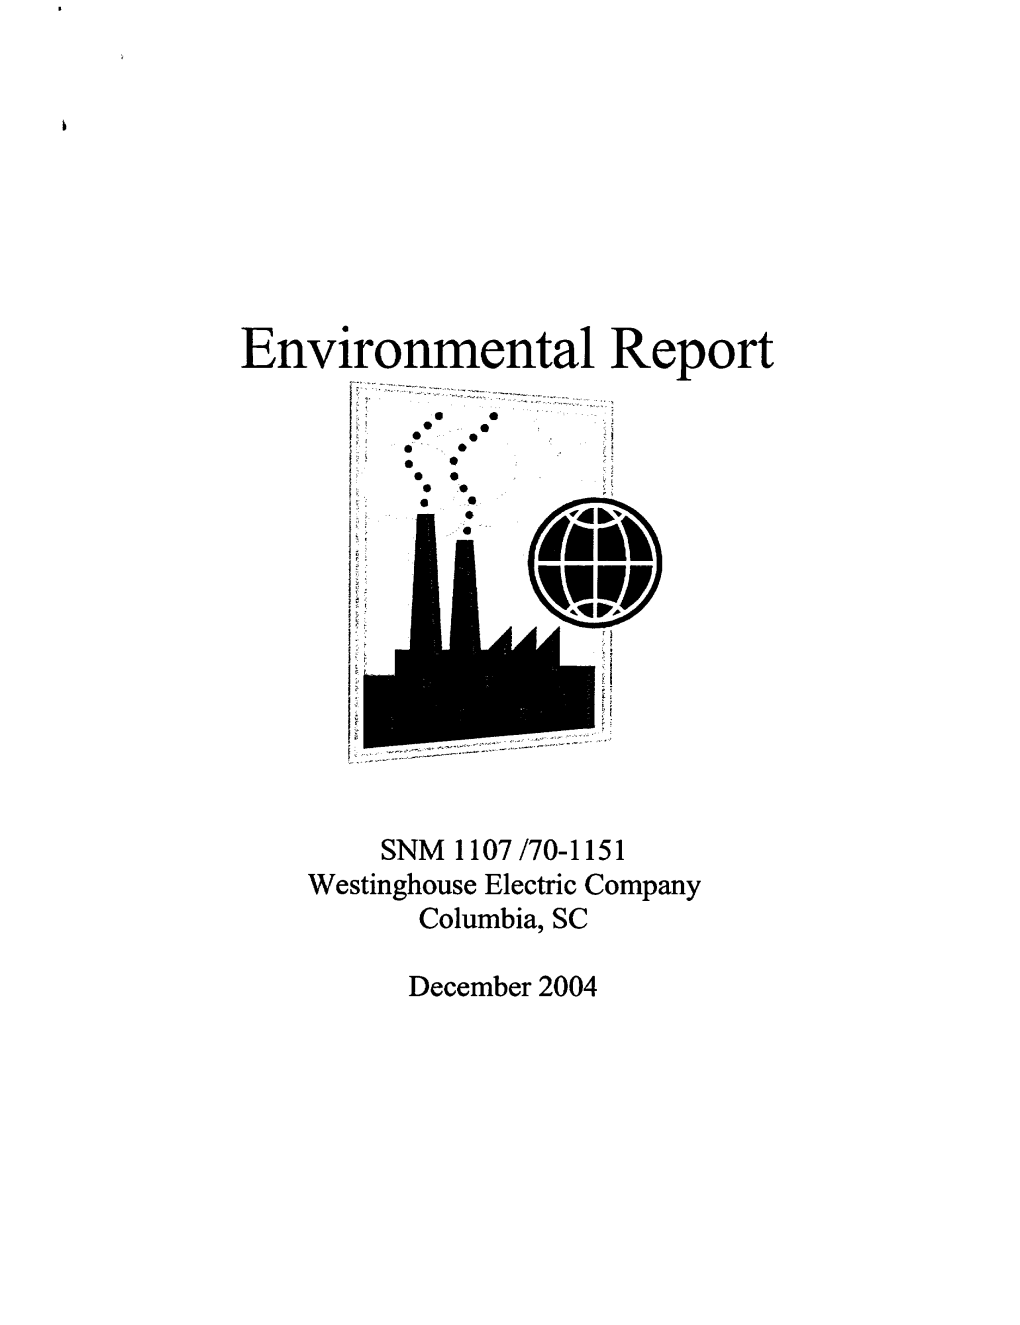 Westinghouse Electric Co, Environmental Report for License SNM-1107 Renewal Application